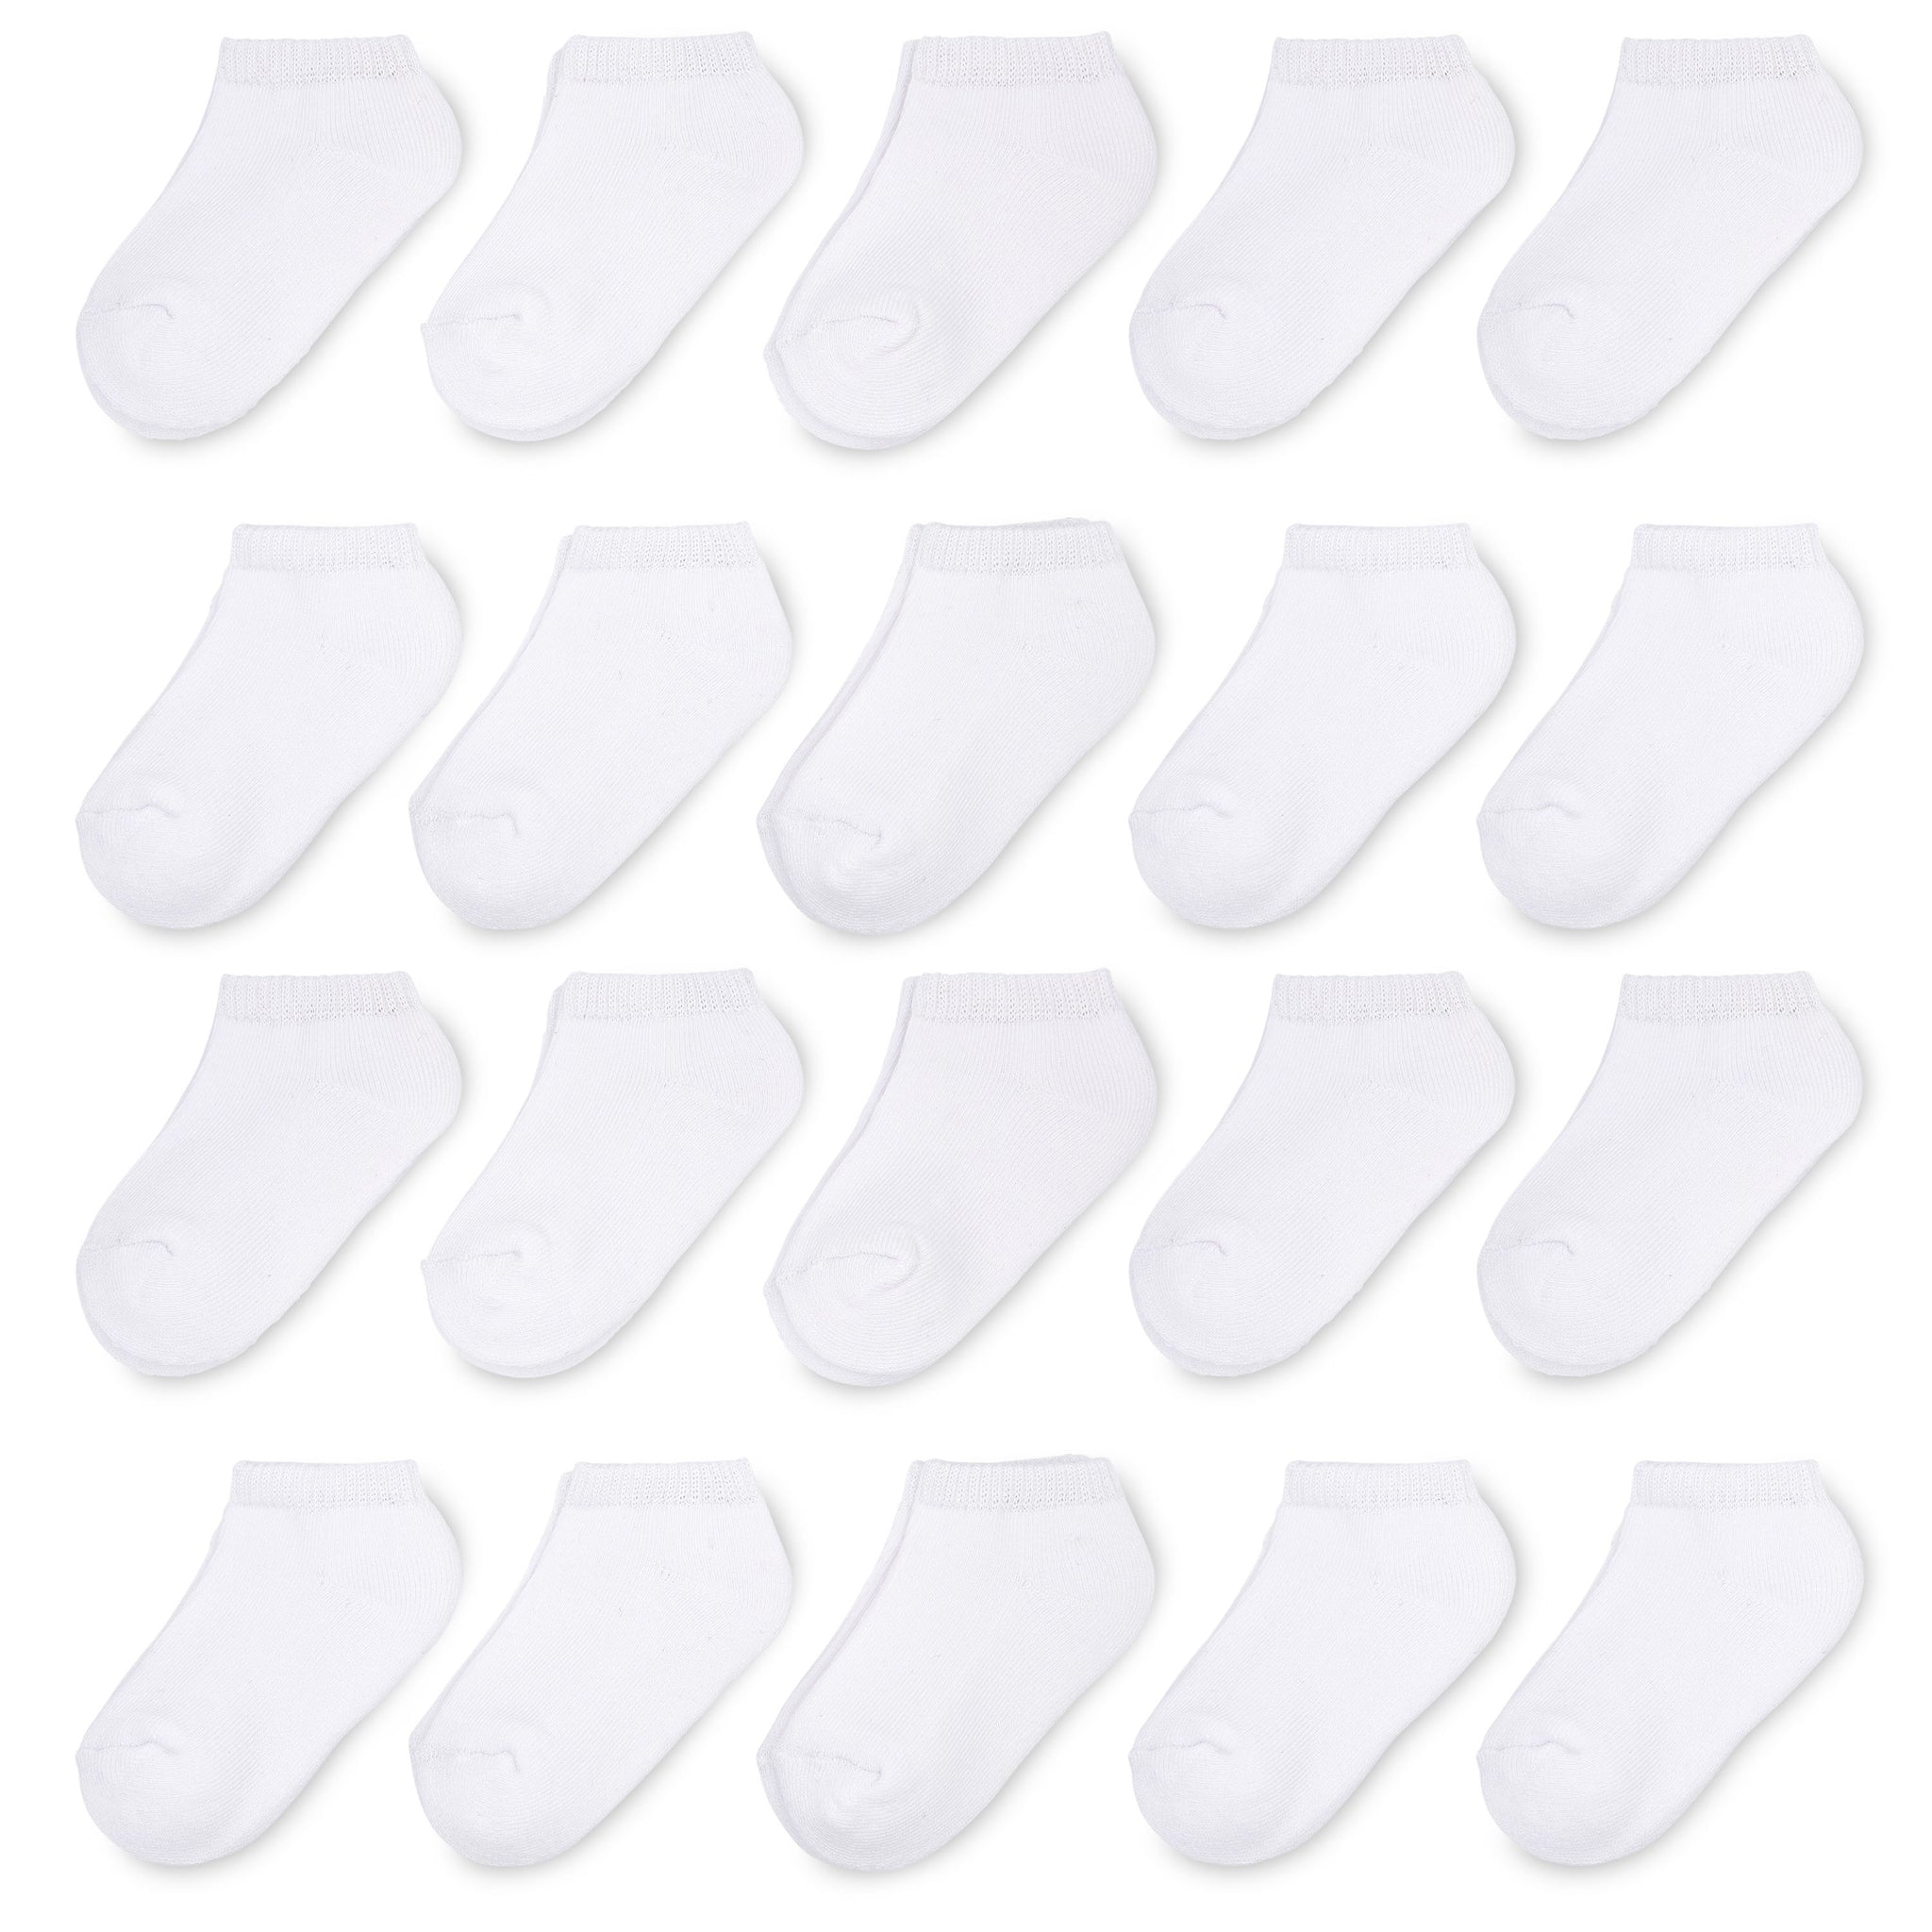 Wonder Nation Baby and Toddler Boys and Girls White Low Cut Socks, 20-Pack